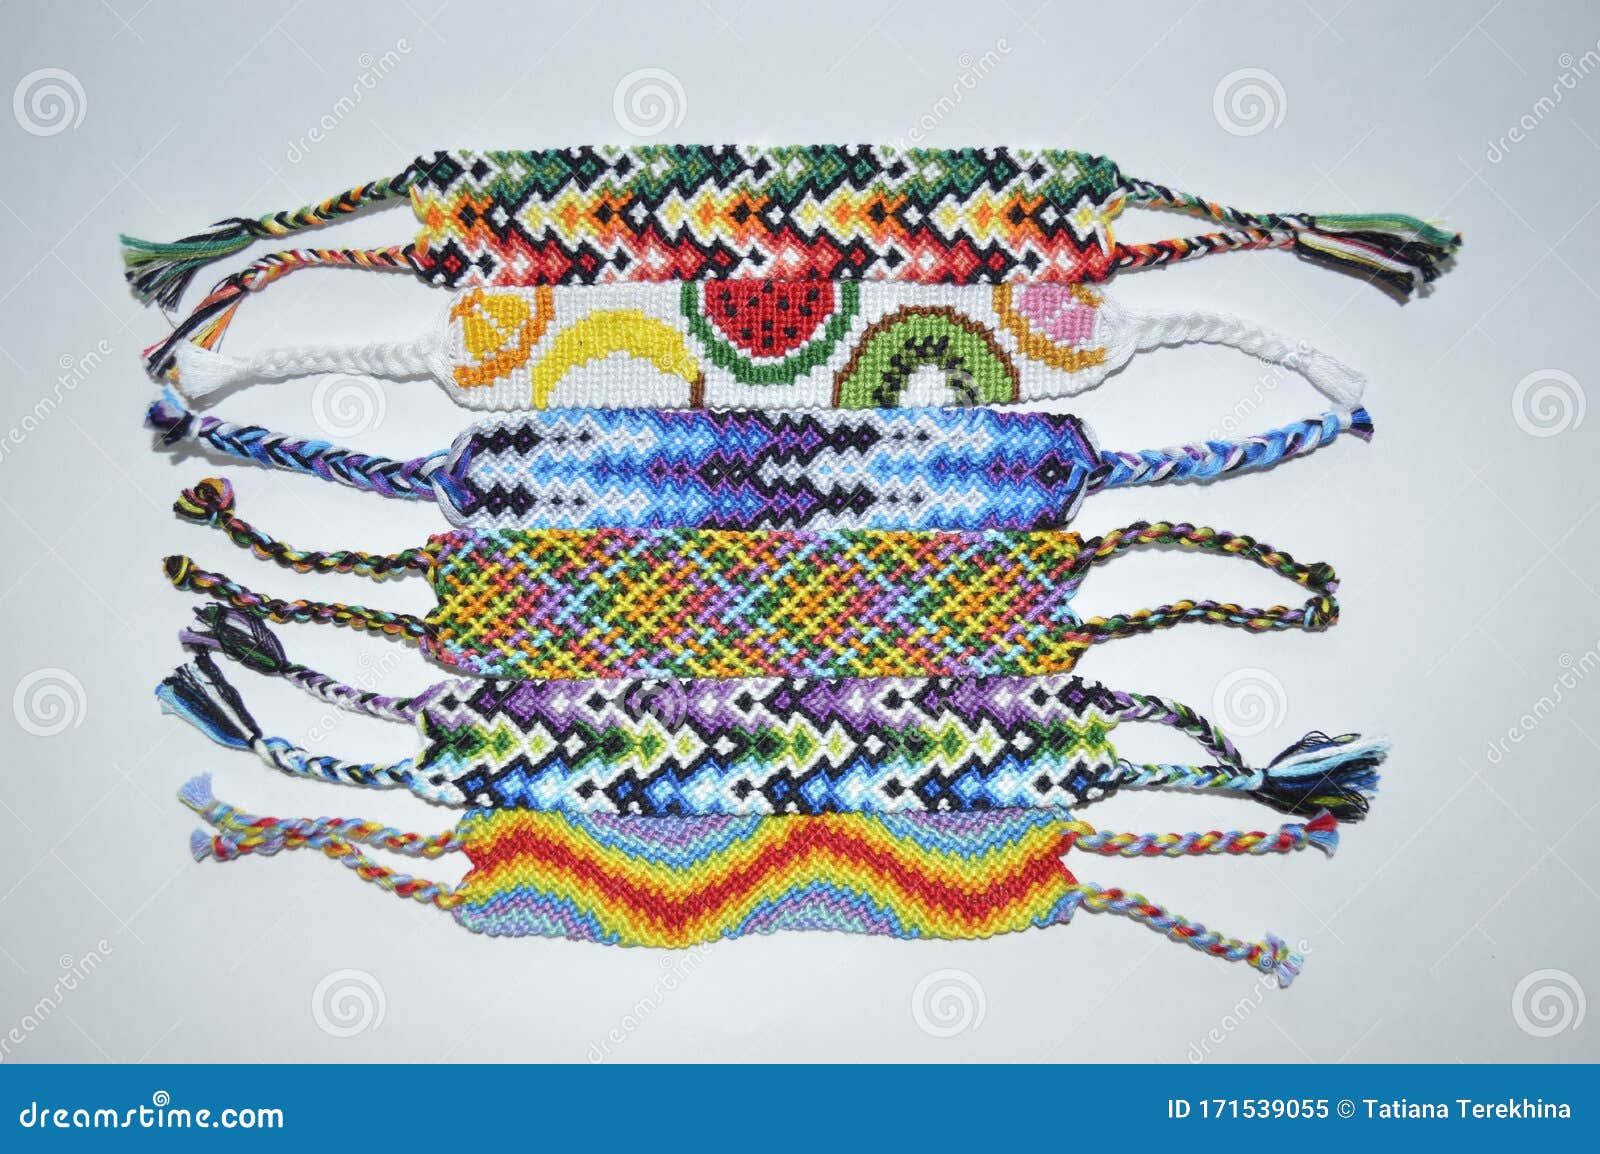 Designer New Unique Colorful and Multi-colored Friendship Bracelets  Handmade of Embroidery Bright Floss and Thread with Knots Isol Stock Image  - Image of design, lush: 171539287